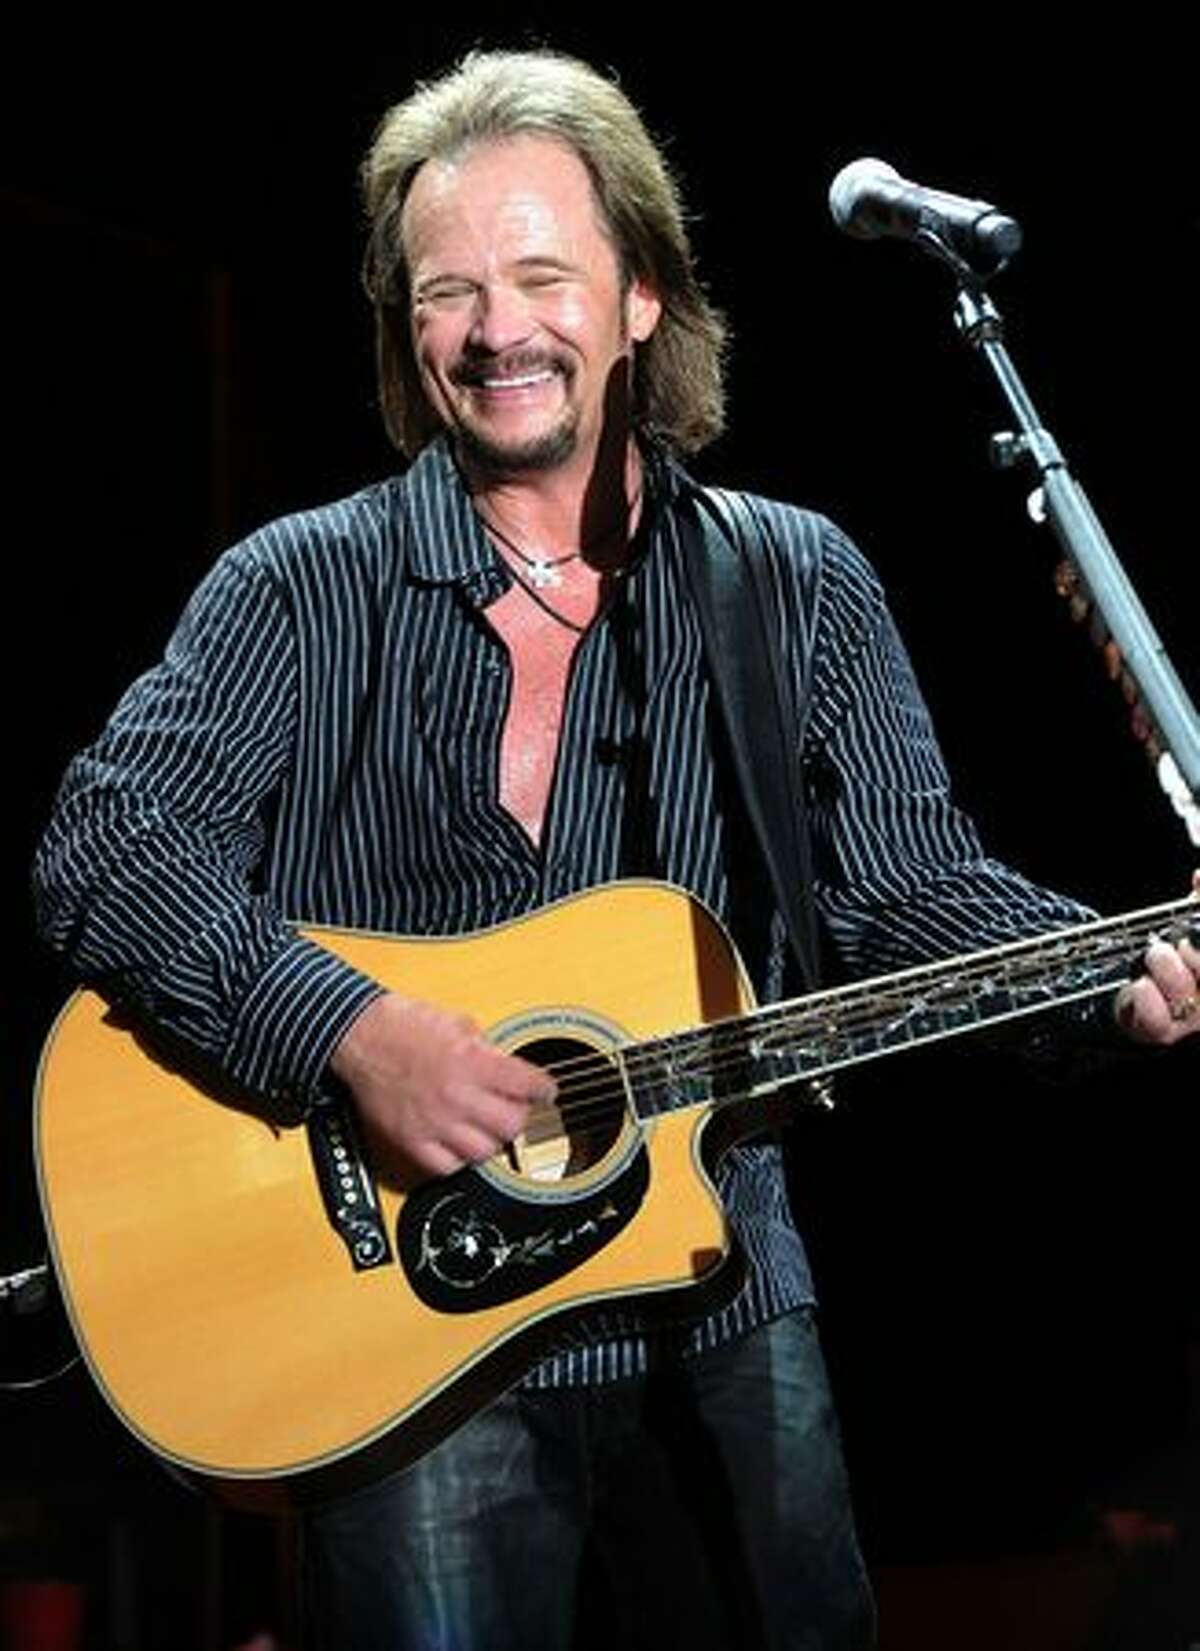 Singer/Songwriter Travis Tritt performs during the 2010 BamaJam Music & Arts Festival at the corner of Hwy 167 and County Road 156.